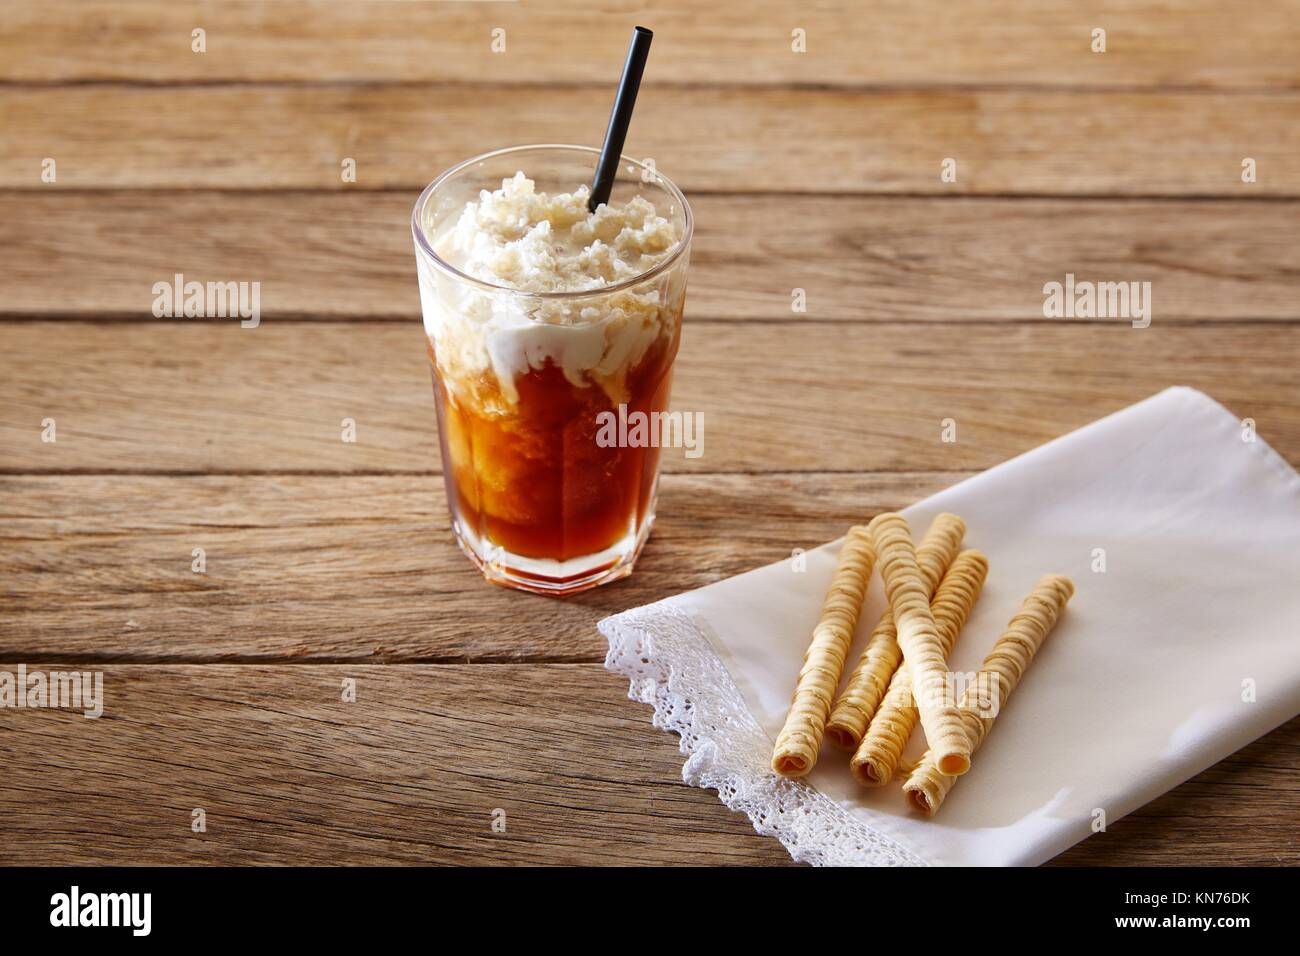 Coffee smoothie with wafers on vintage wood table. Stock Photo